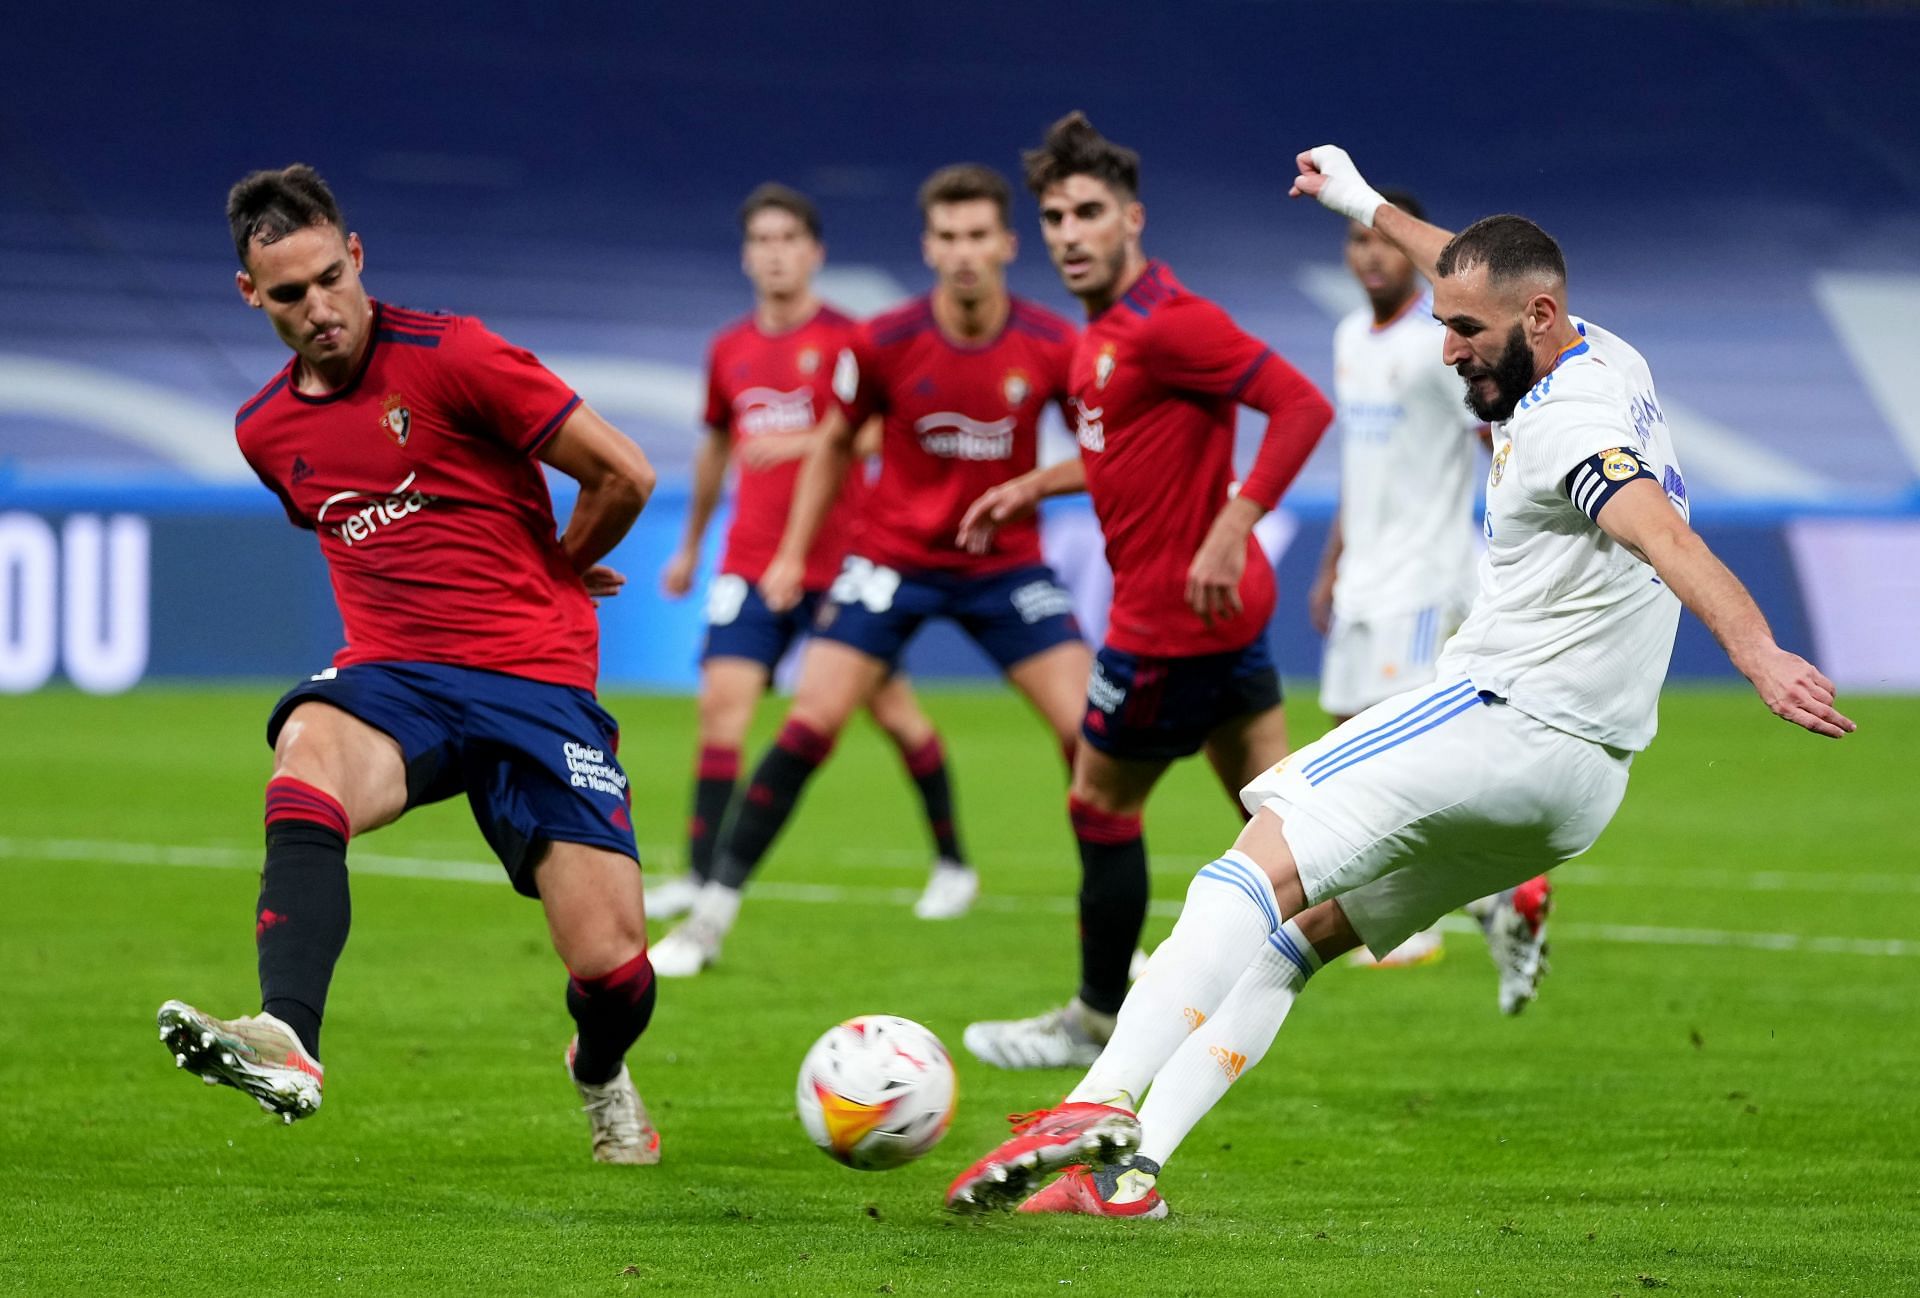 Real Madrid and Osasuna played out a goalless draw